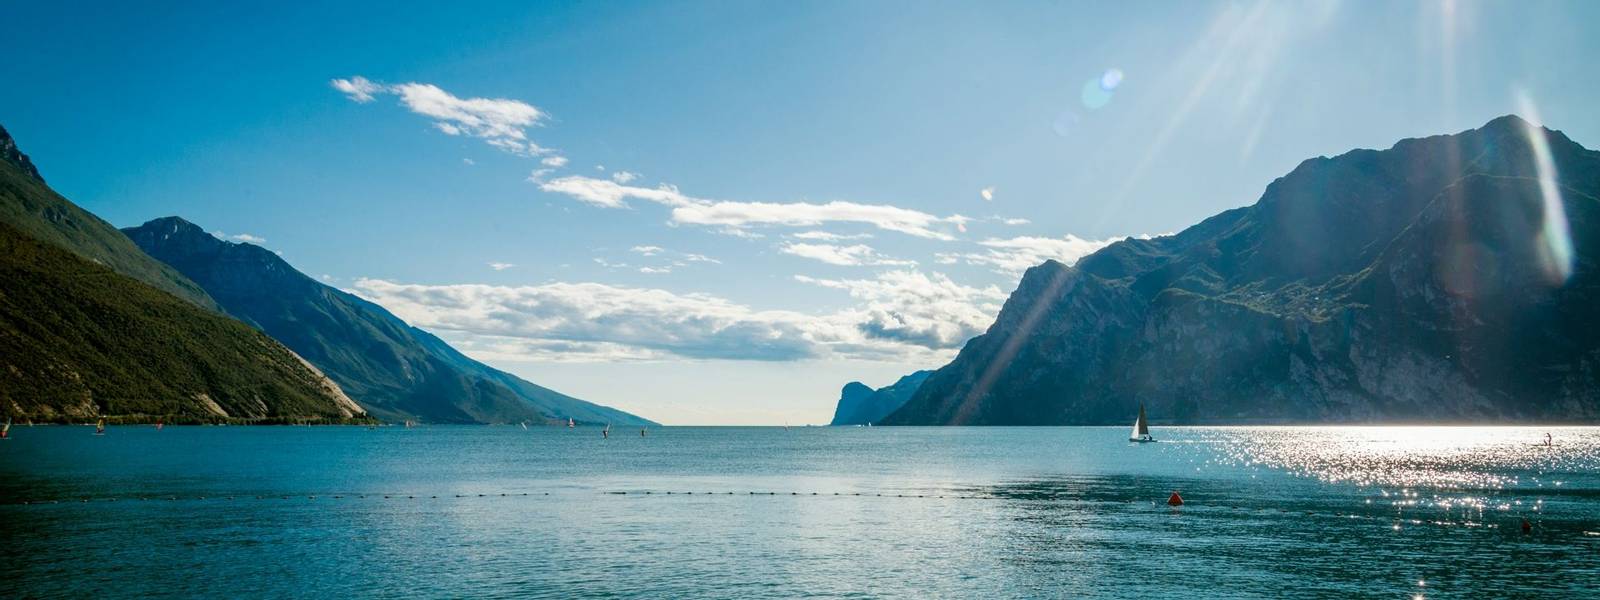 Lake Garda is the largest lake in Italy in summer